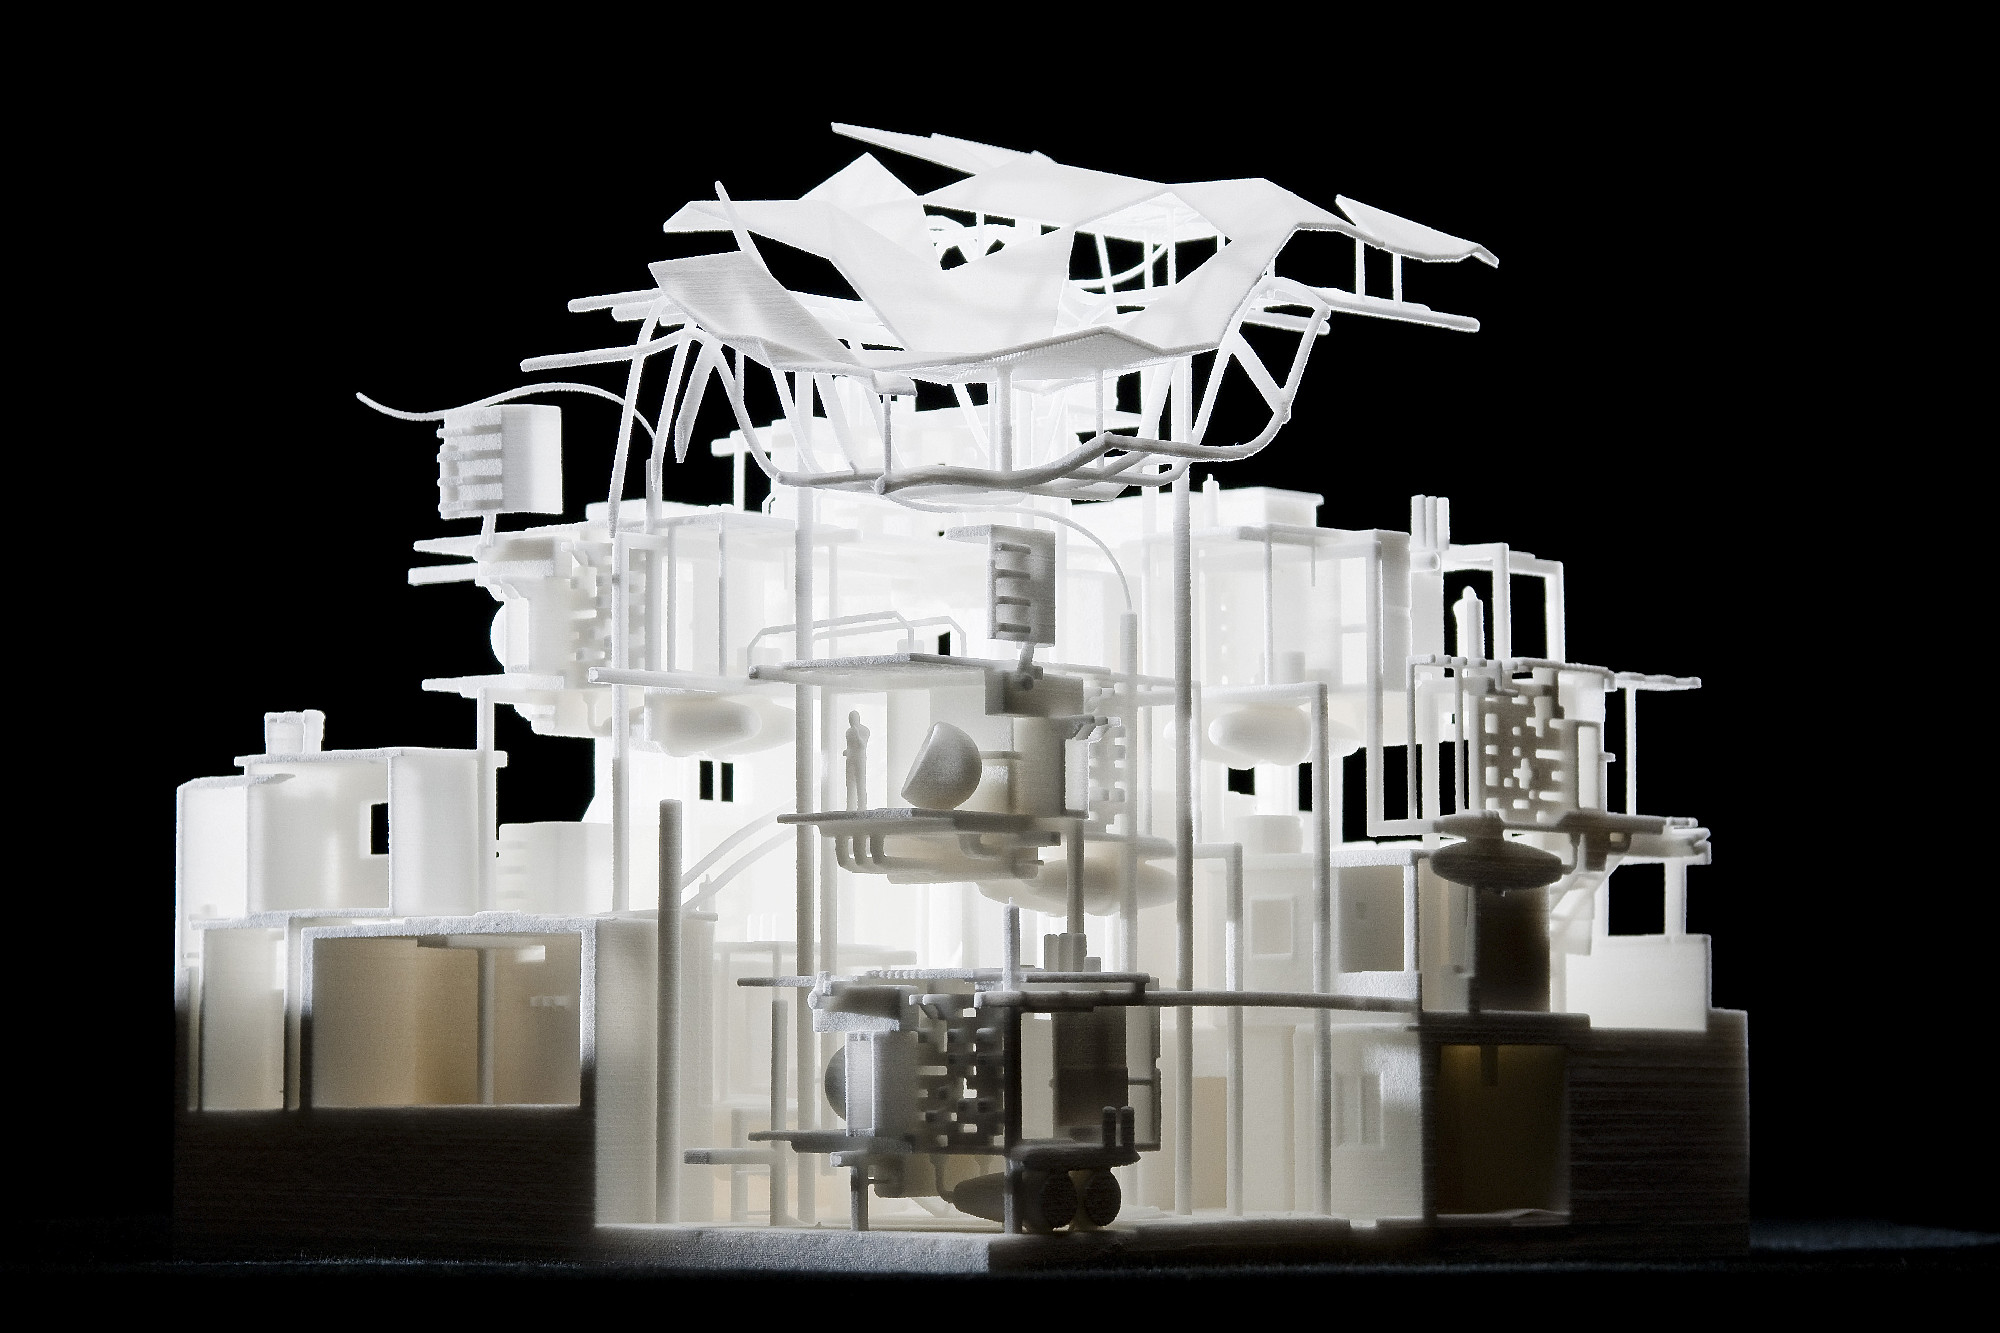 Architectural model photography by architectural Photographer Richard Stonehouse.